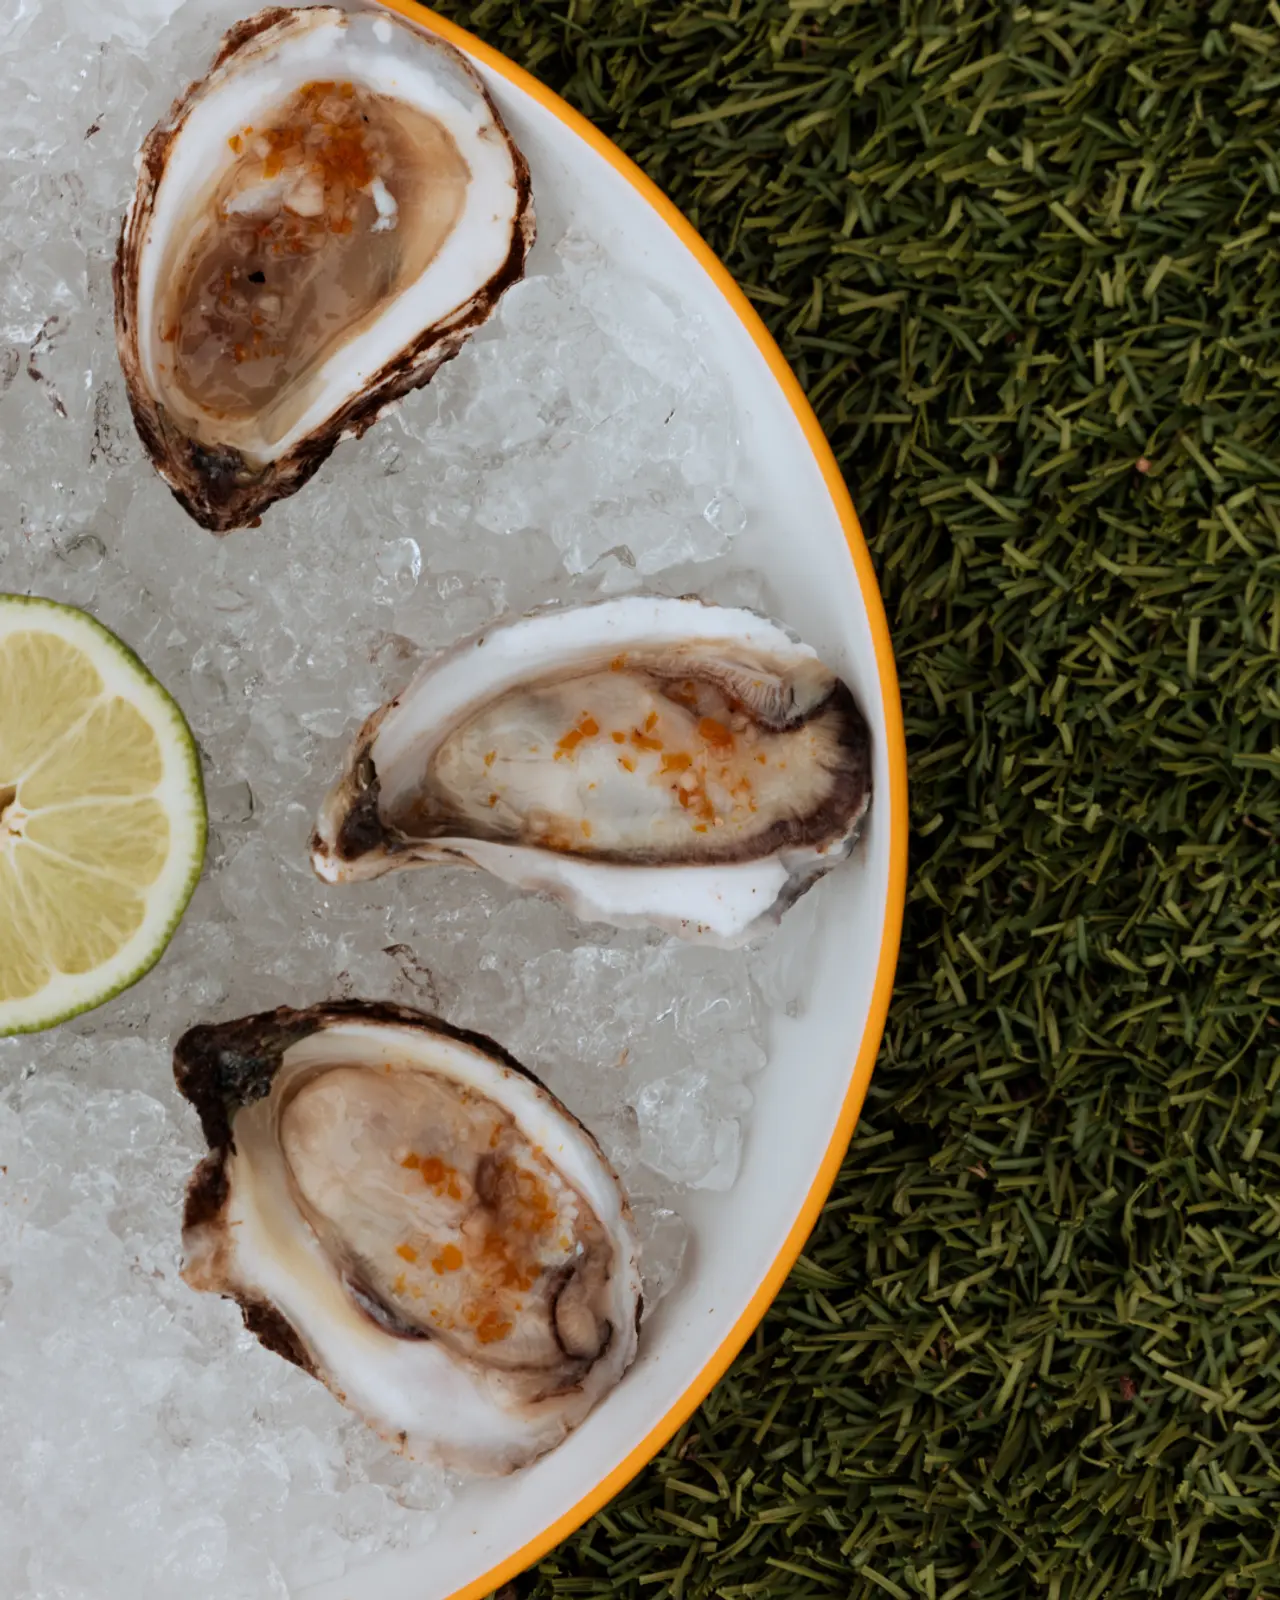 Fresh oysters on a bed of ice accompanied by a wedge of lime are presented on a plate resting on a grassy surface.